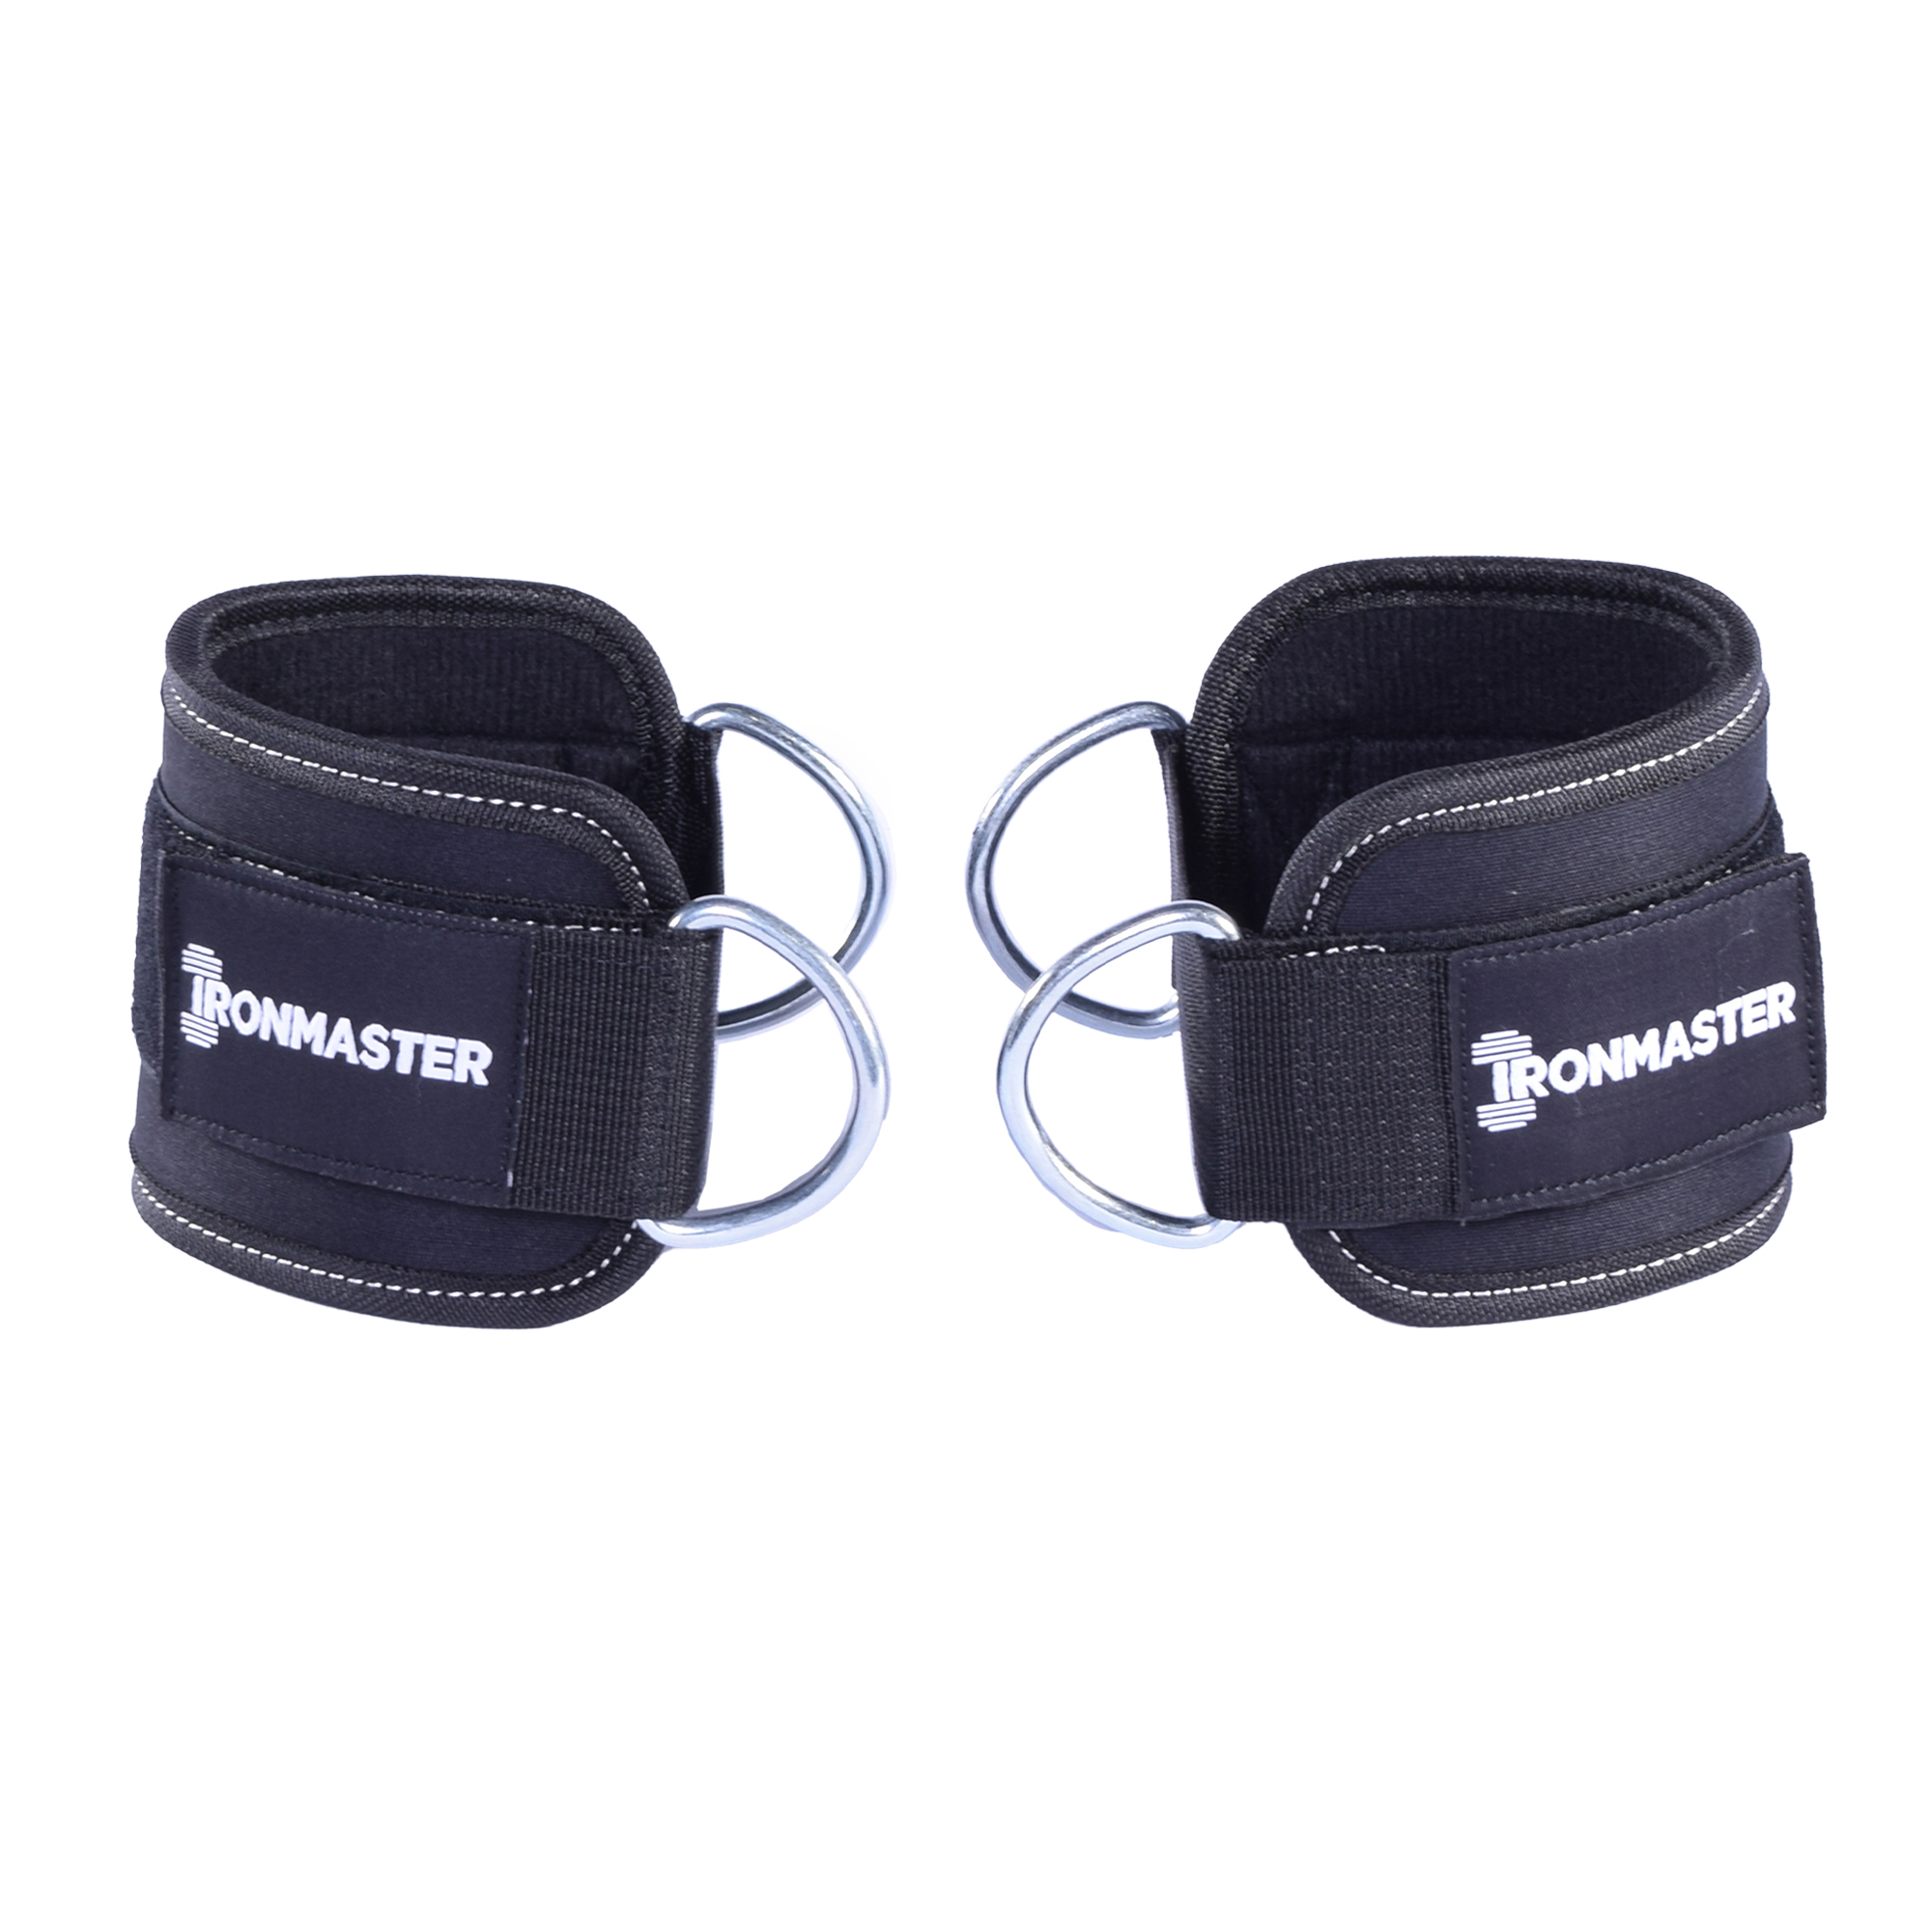 Ironmaster Ankle Cuffs